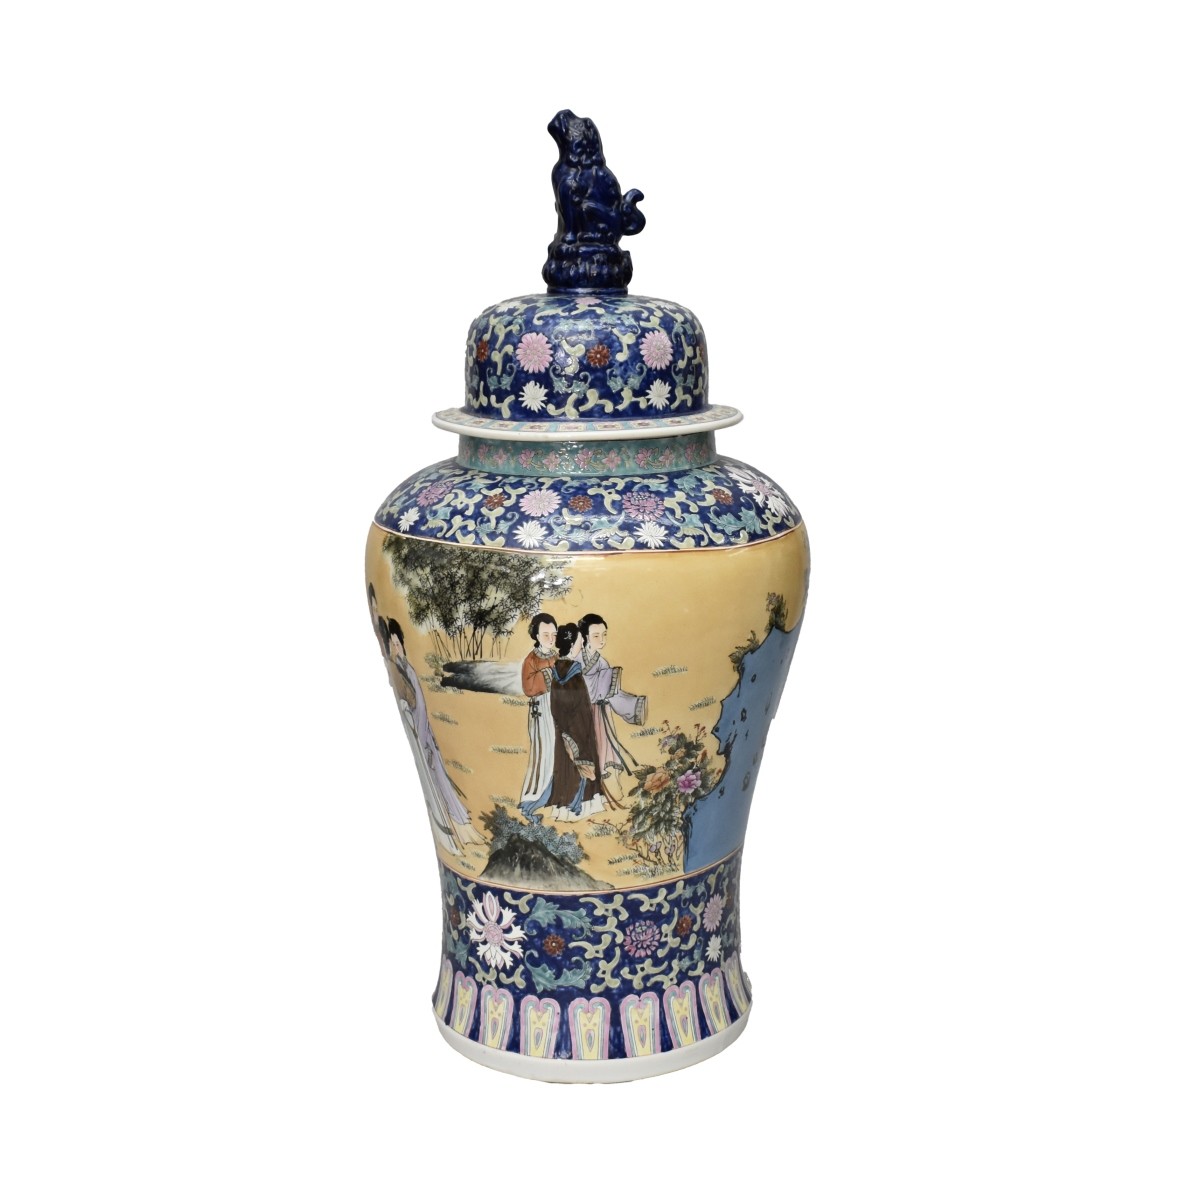 Large Chinese Porcelain Covered Urn